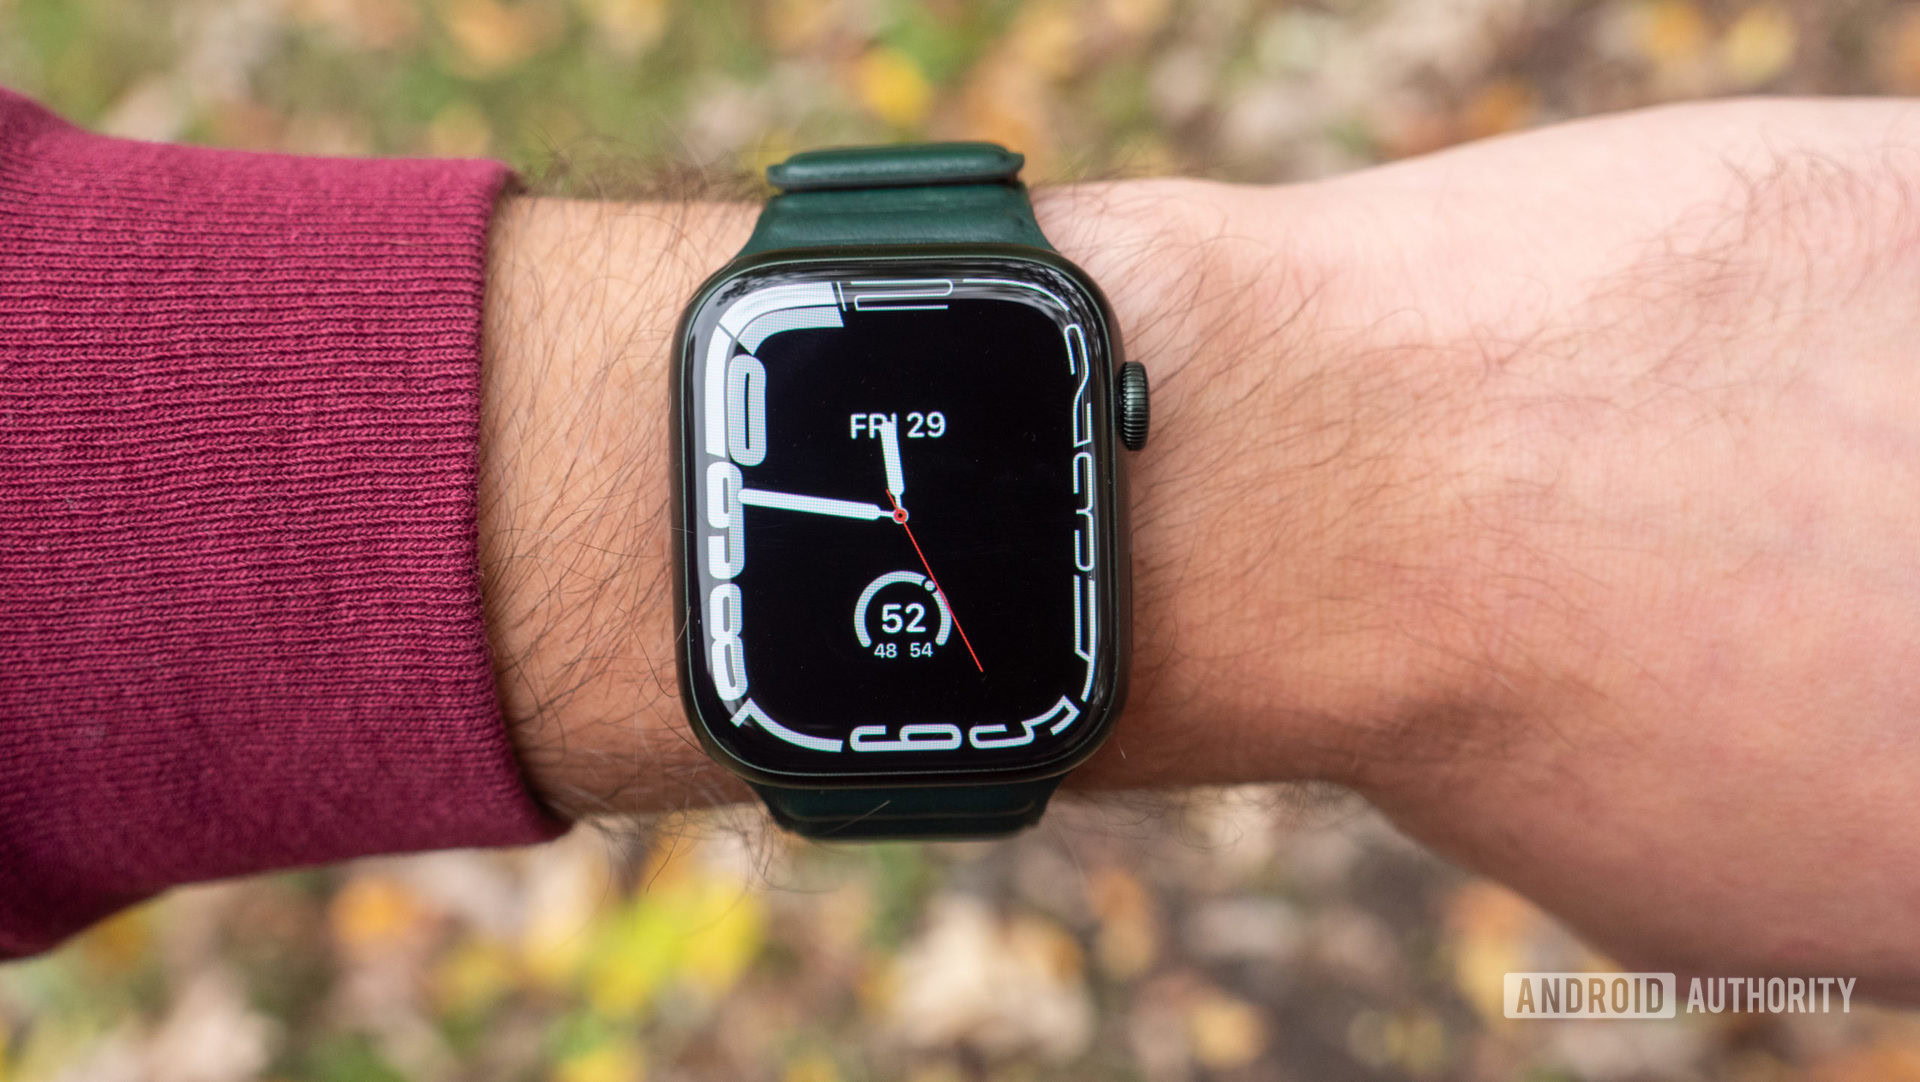 A user wears an Apple Watch Series 7 displaying the Contour watch face.